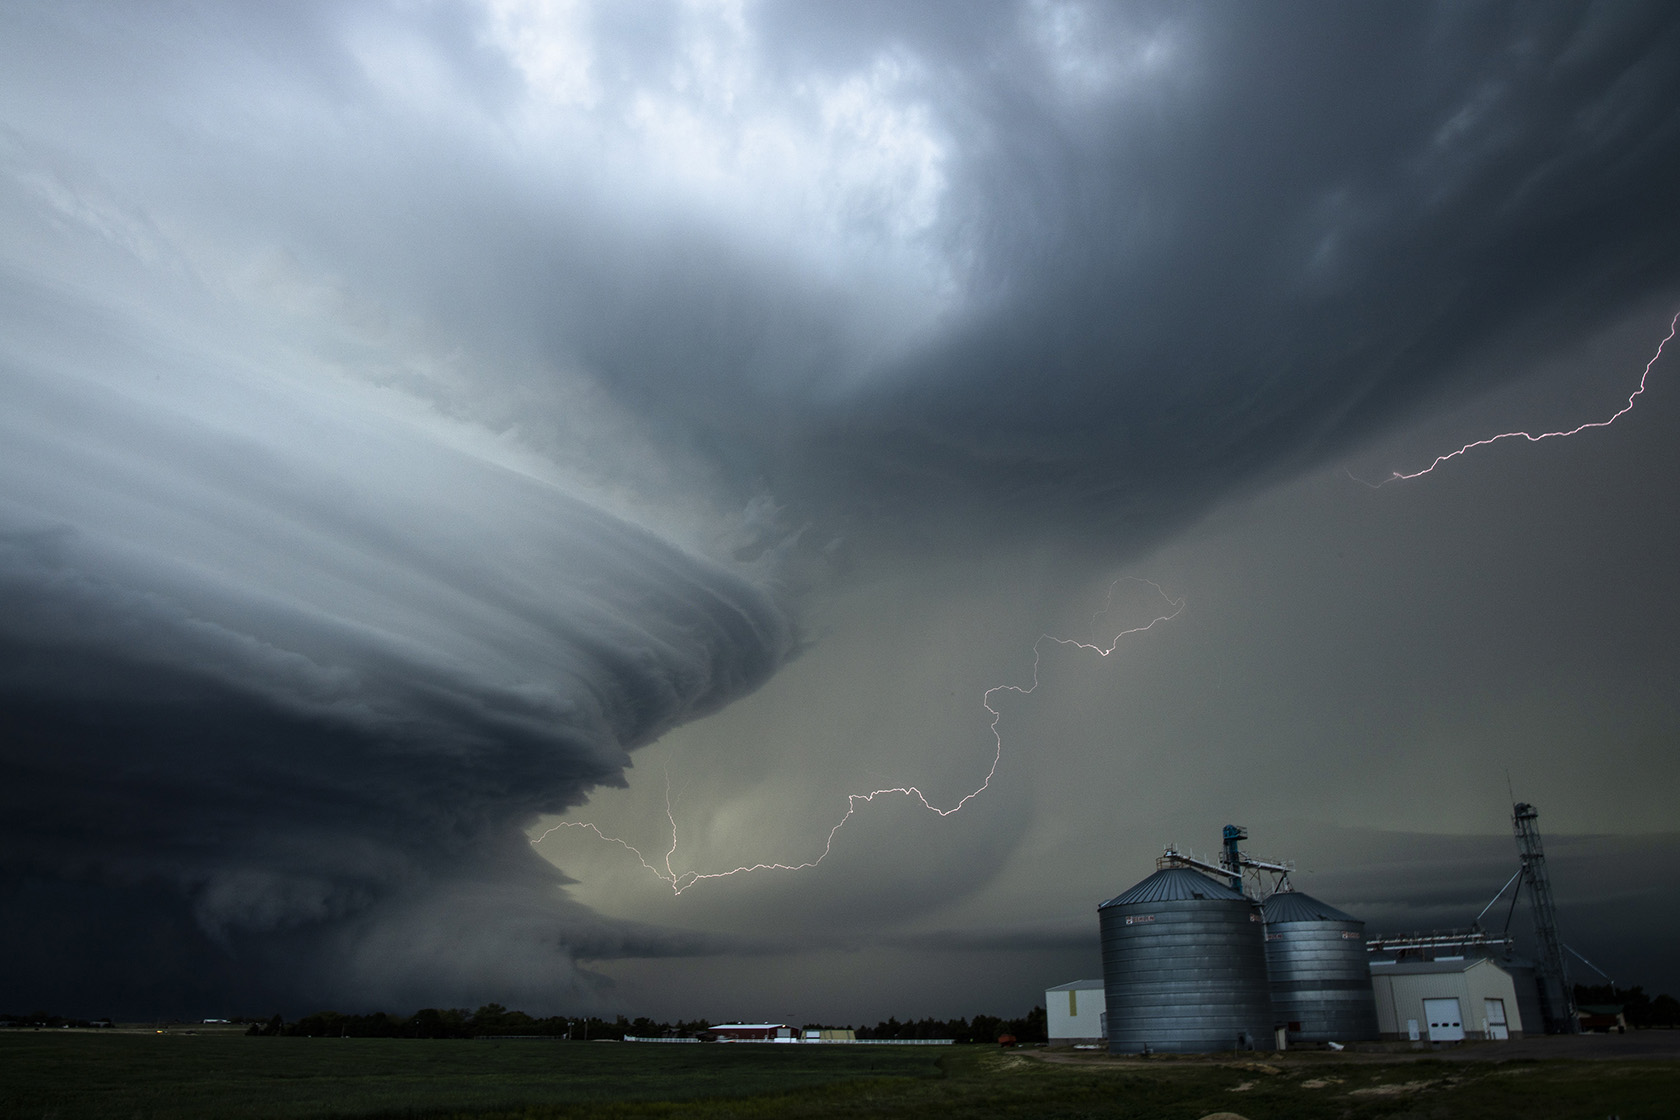 A 'supercell' storm towers over a farm grain elevator in Nebraska, USA.